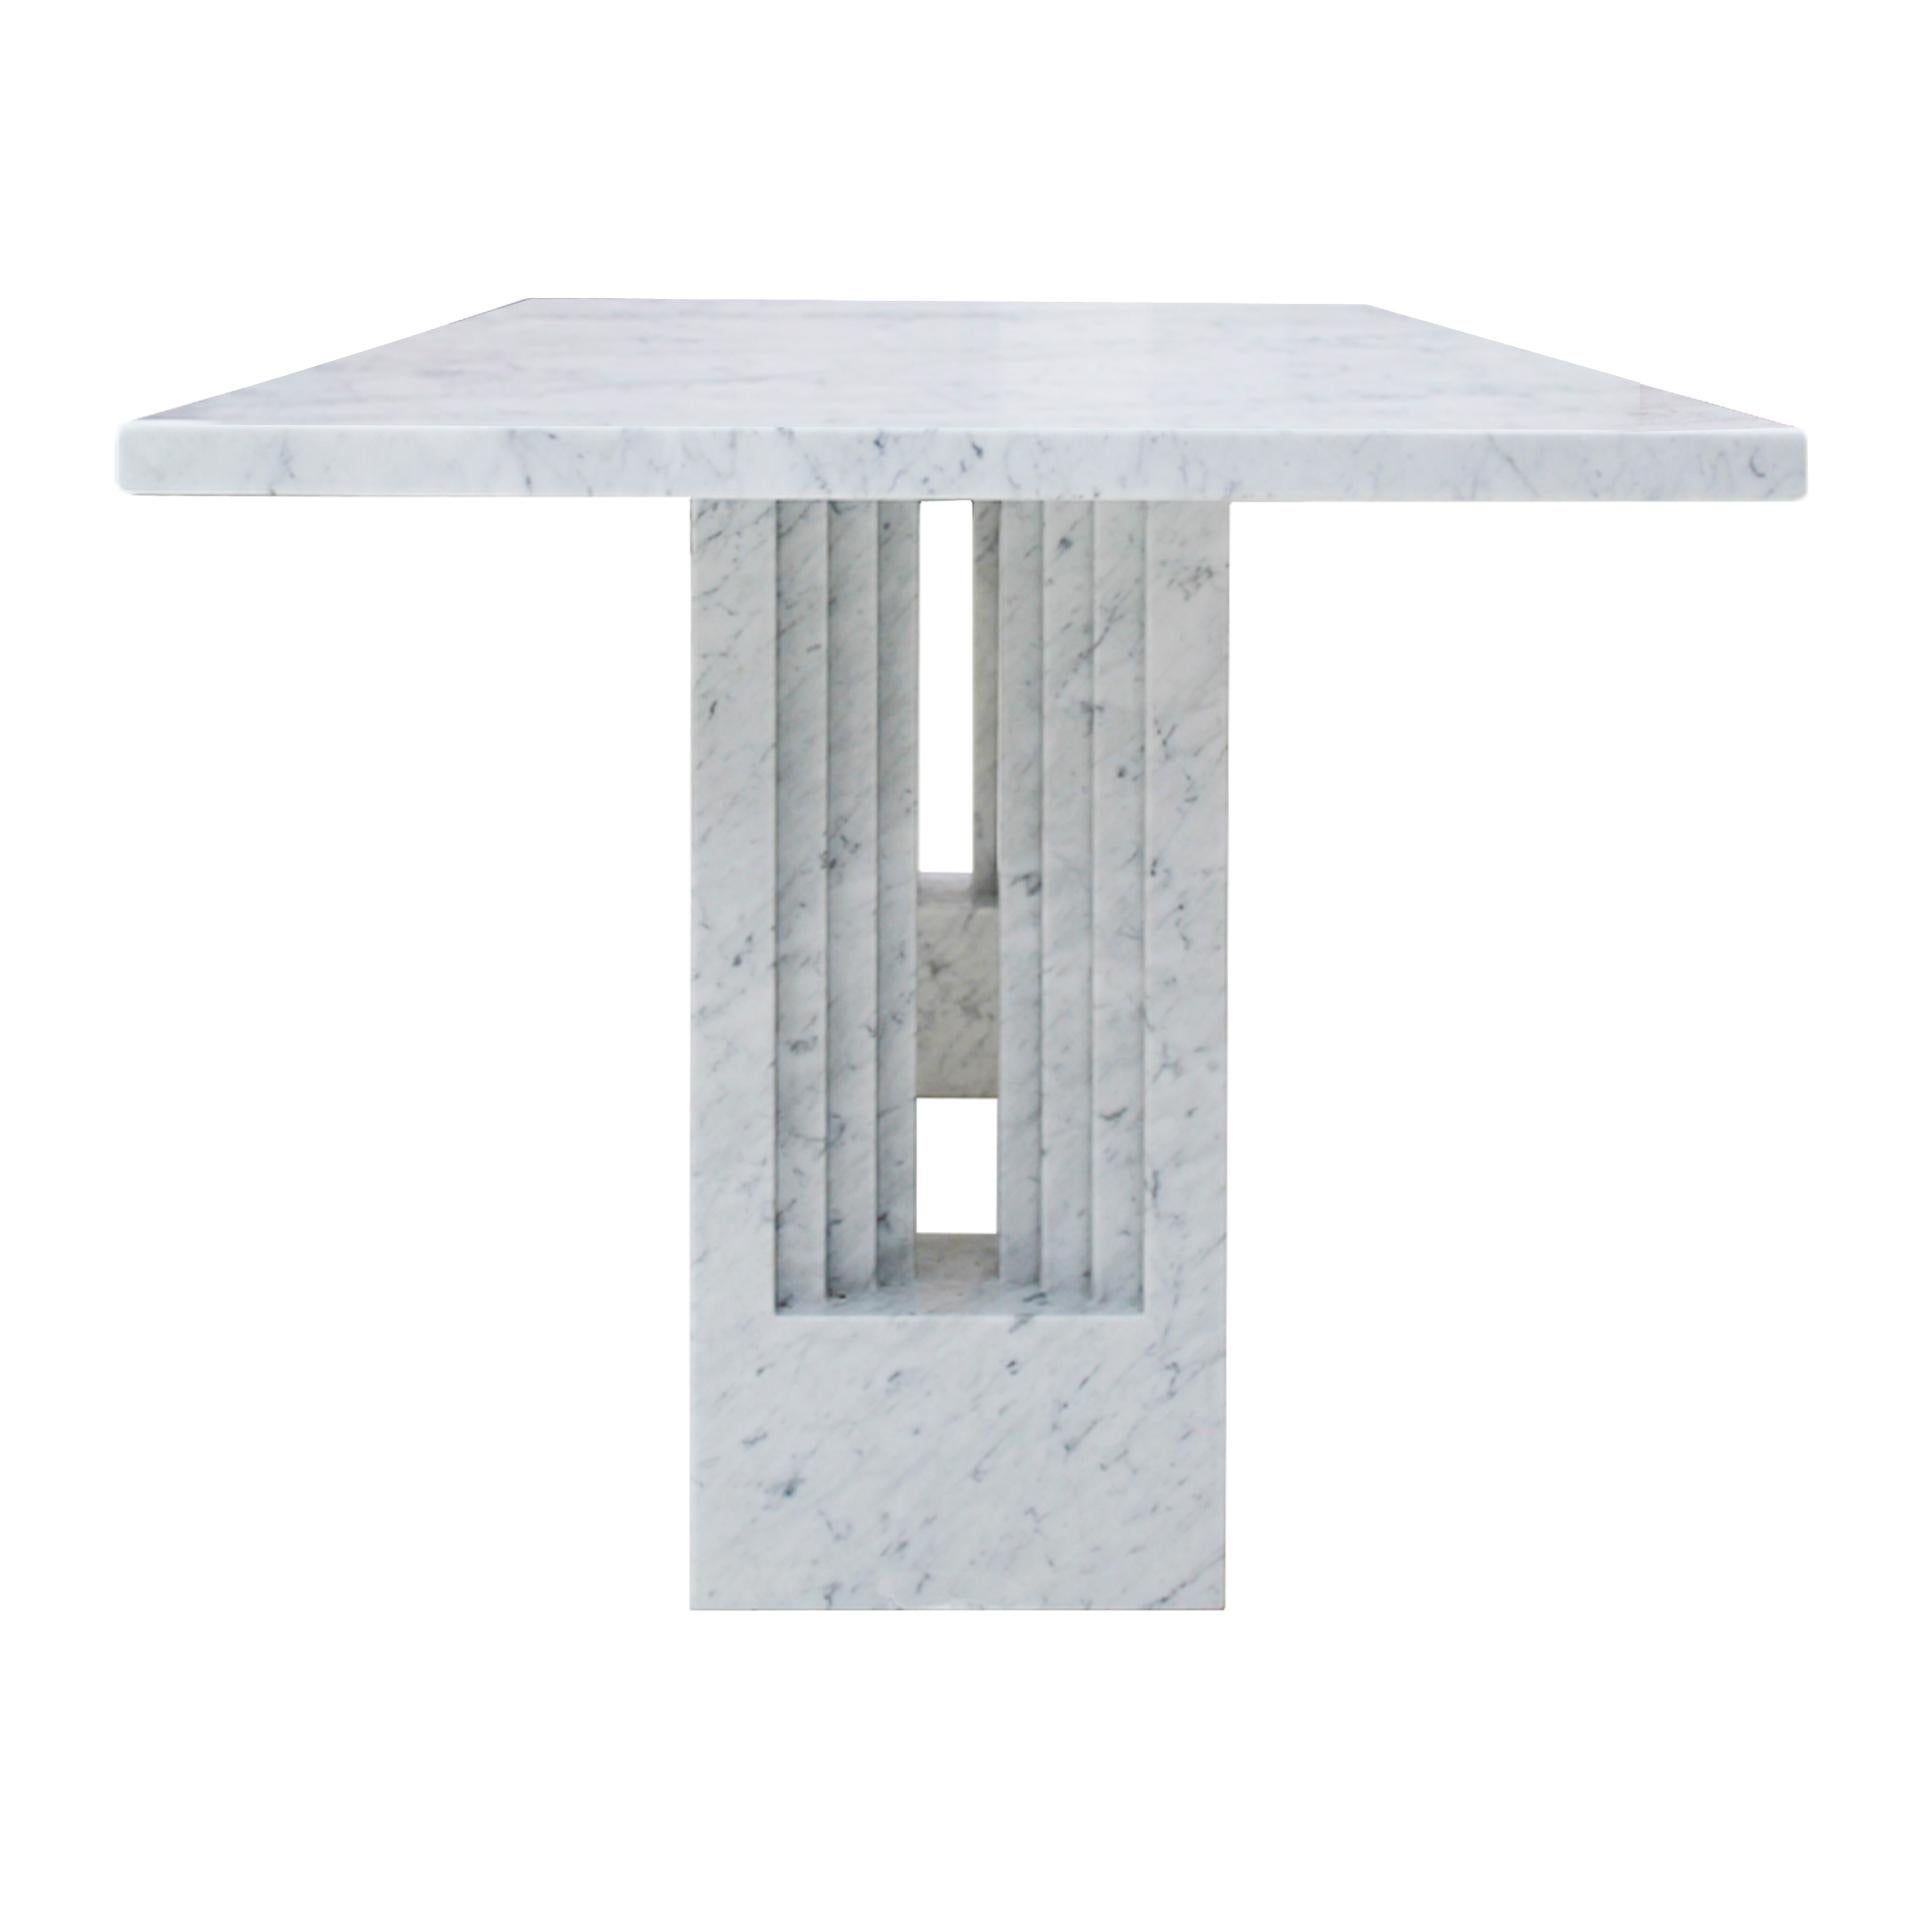 Dining table mod. Delfi designed by Carlo Scarpa and Marcel Breuer for Gavina. Composed of two sculptural bases and a rectangular envelope 4 cm thick. Made in Carrara marble. Italy 1968.

Our main target is customer satisfaction, so we include in